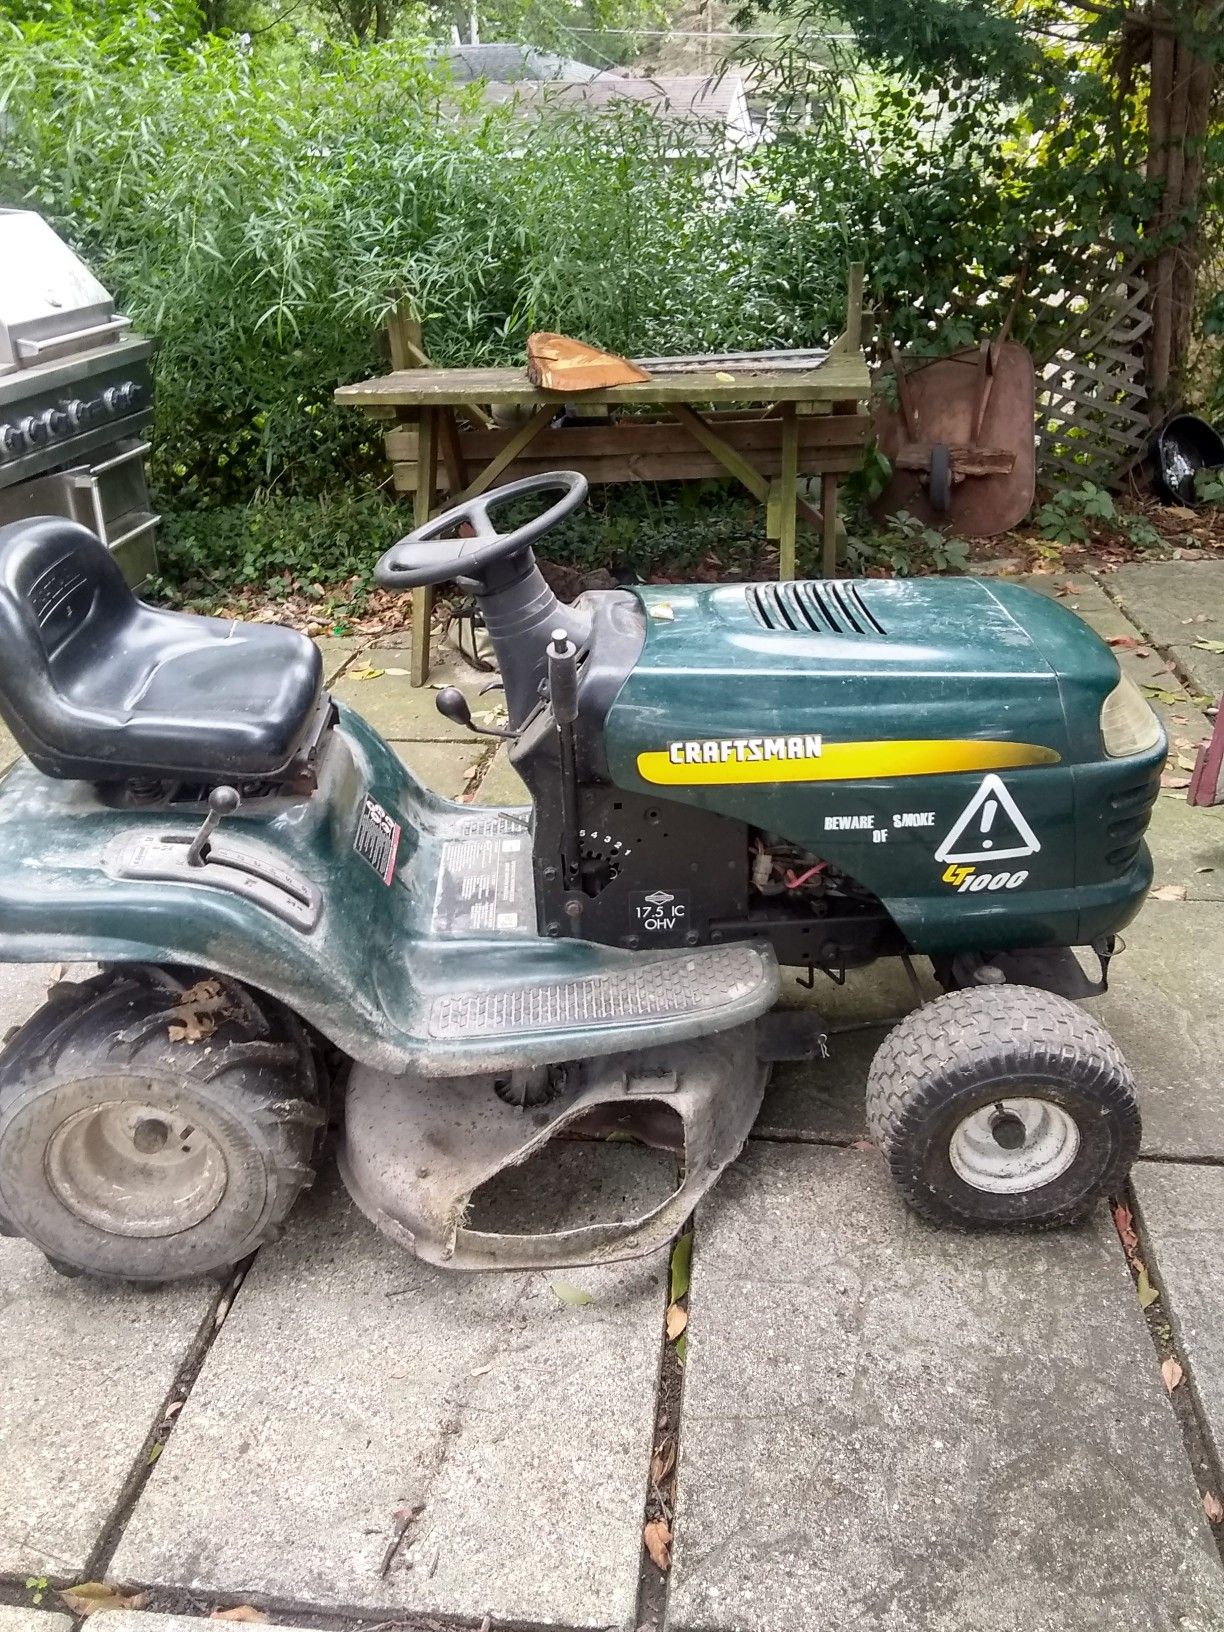 Craftsman 17.5 hp lawn tractor, ran good last year. Needs new starter. Not running this year. New battery otherwise good condition/ tires.